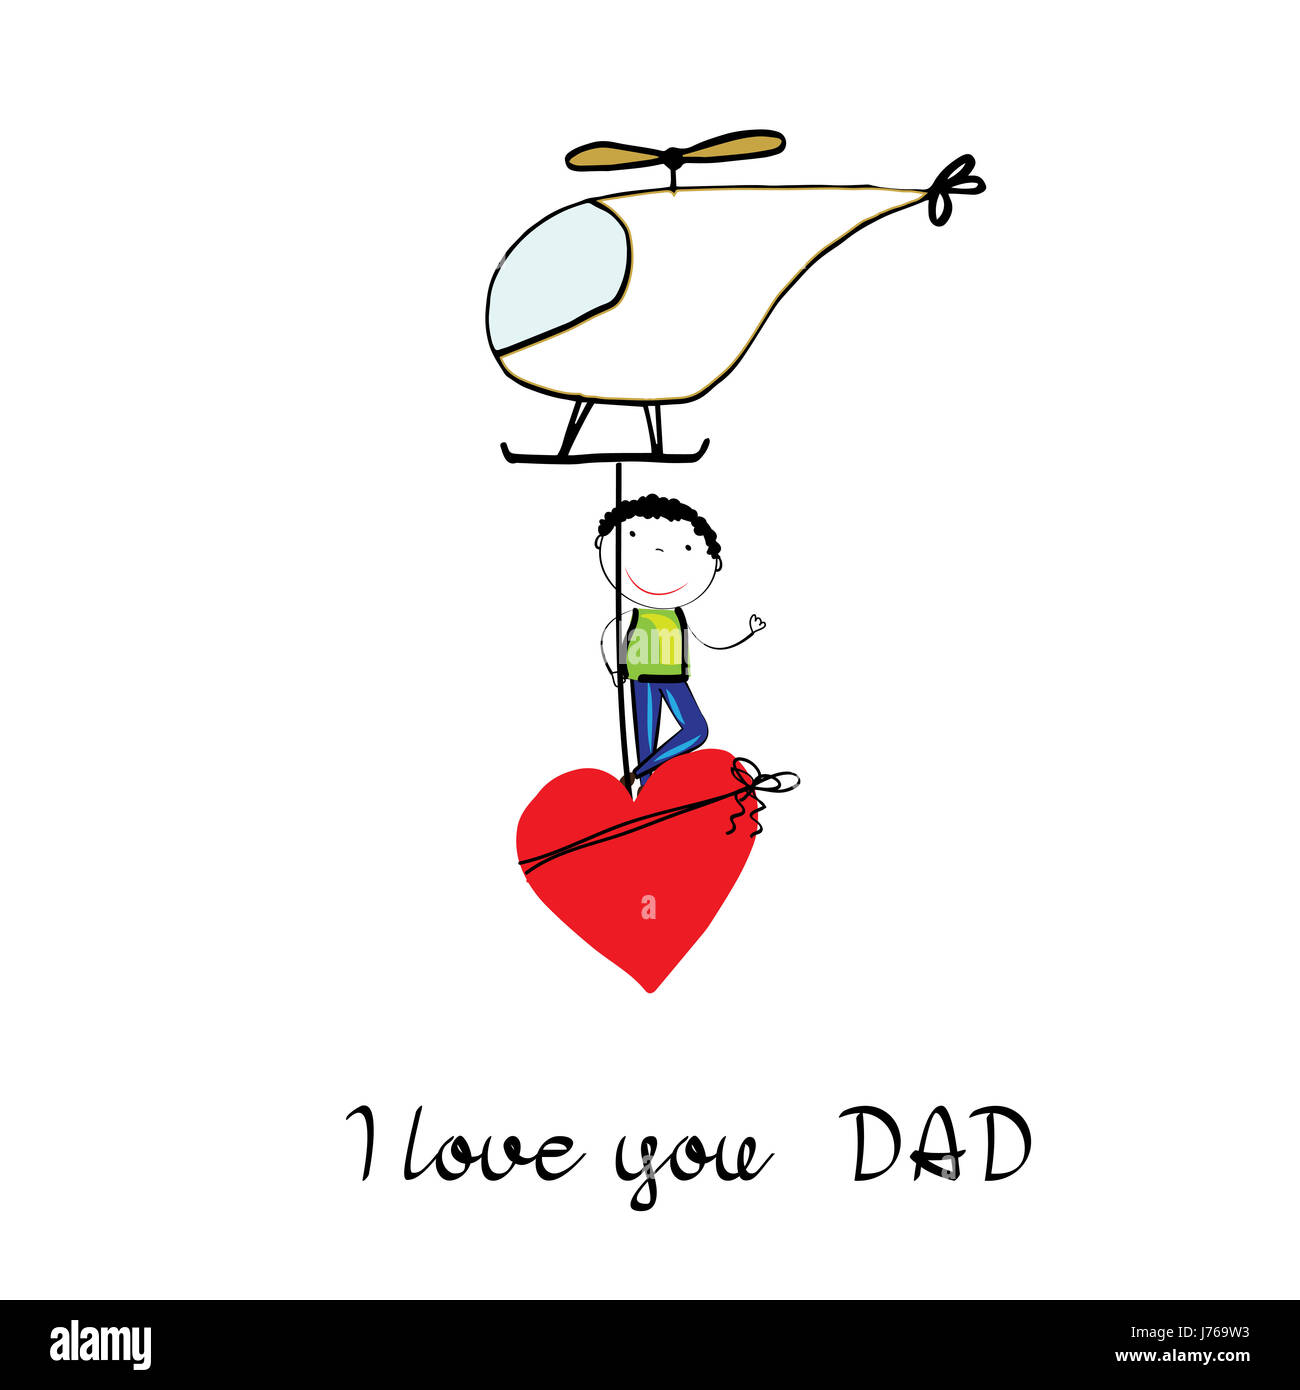 Colorful and sweet card for Father's Day. Children's drawing Stock Photo